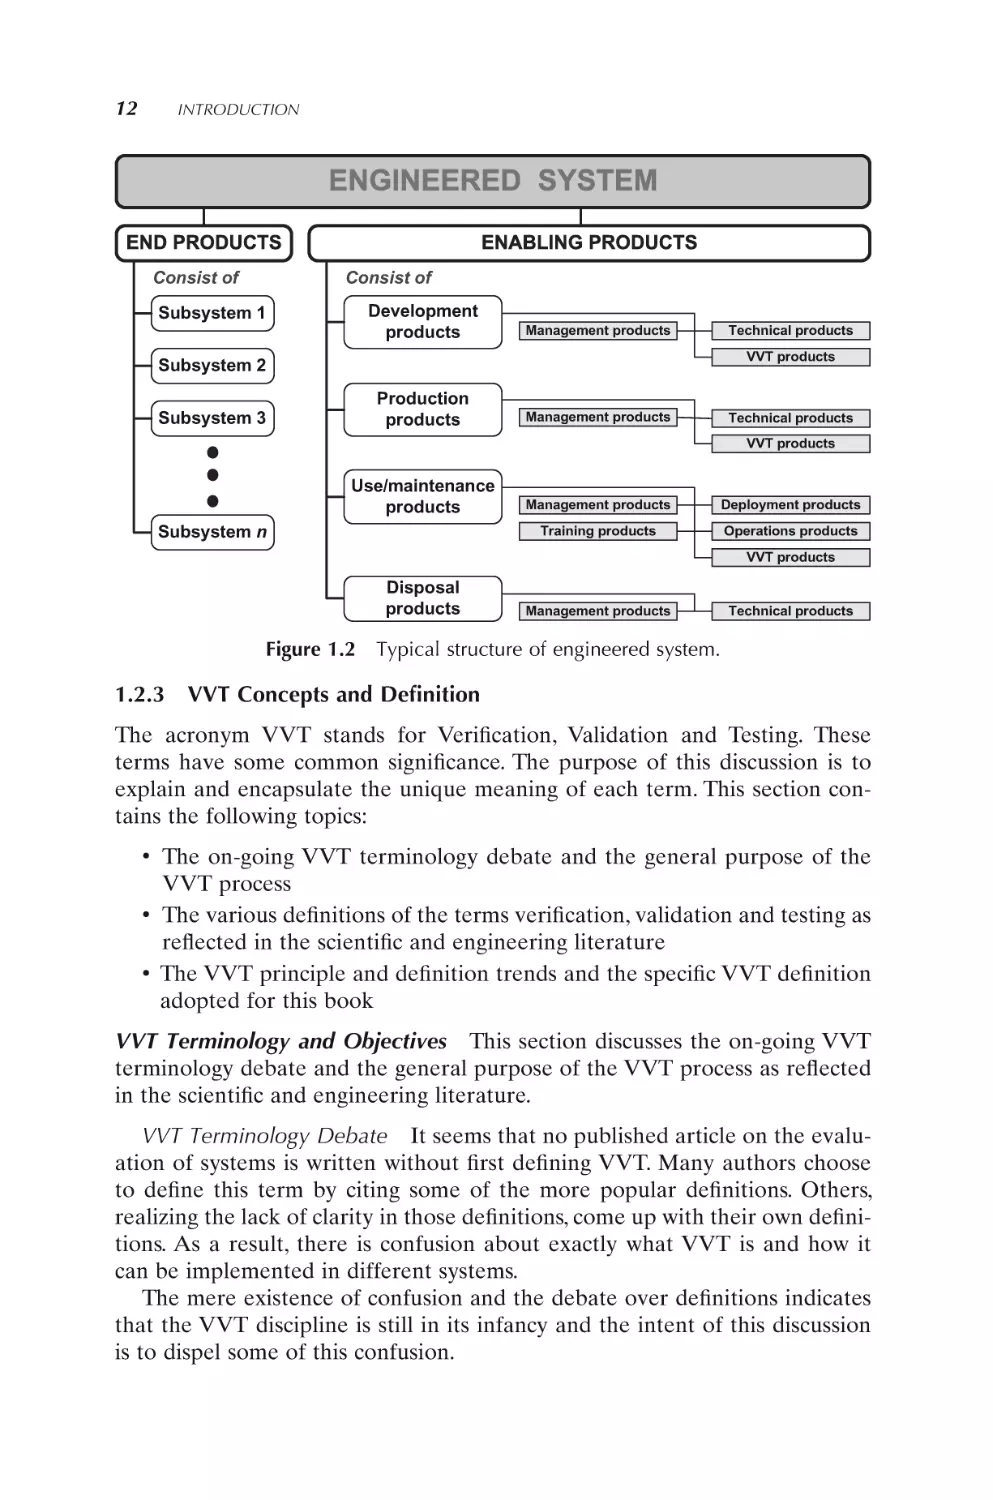 1.2.3 VVT Concepts and Definition